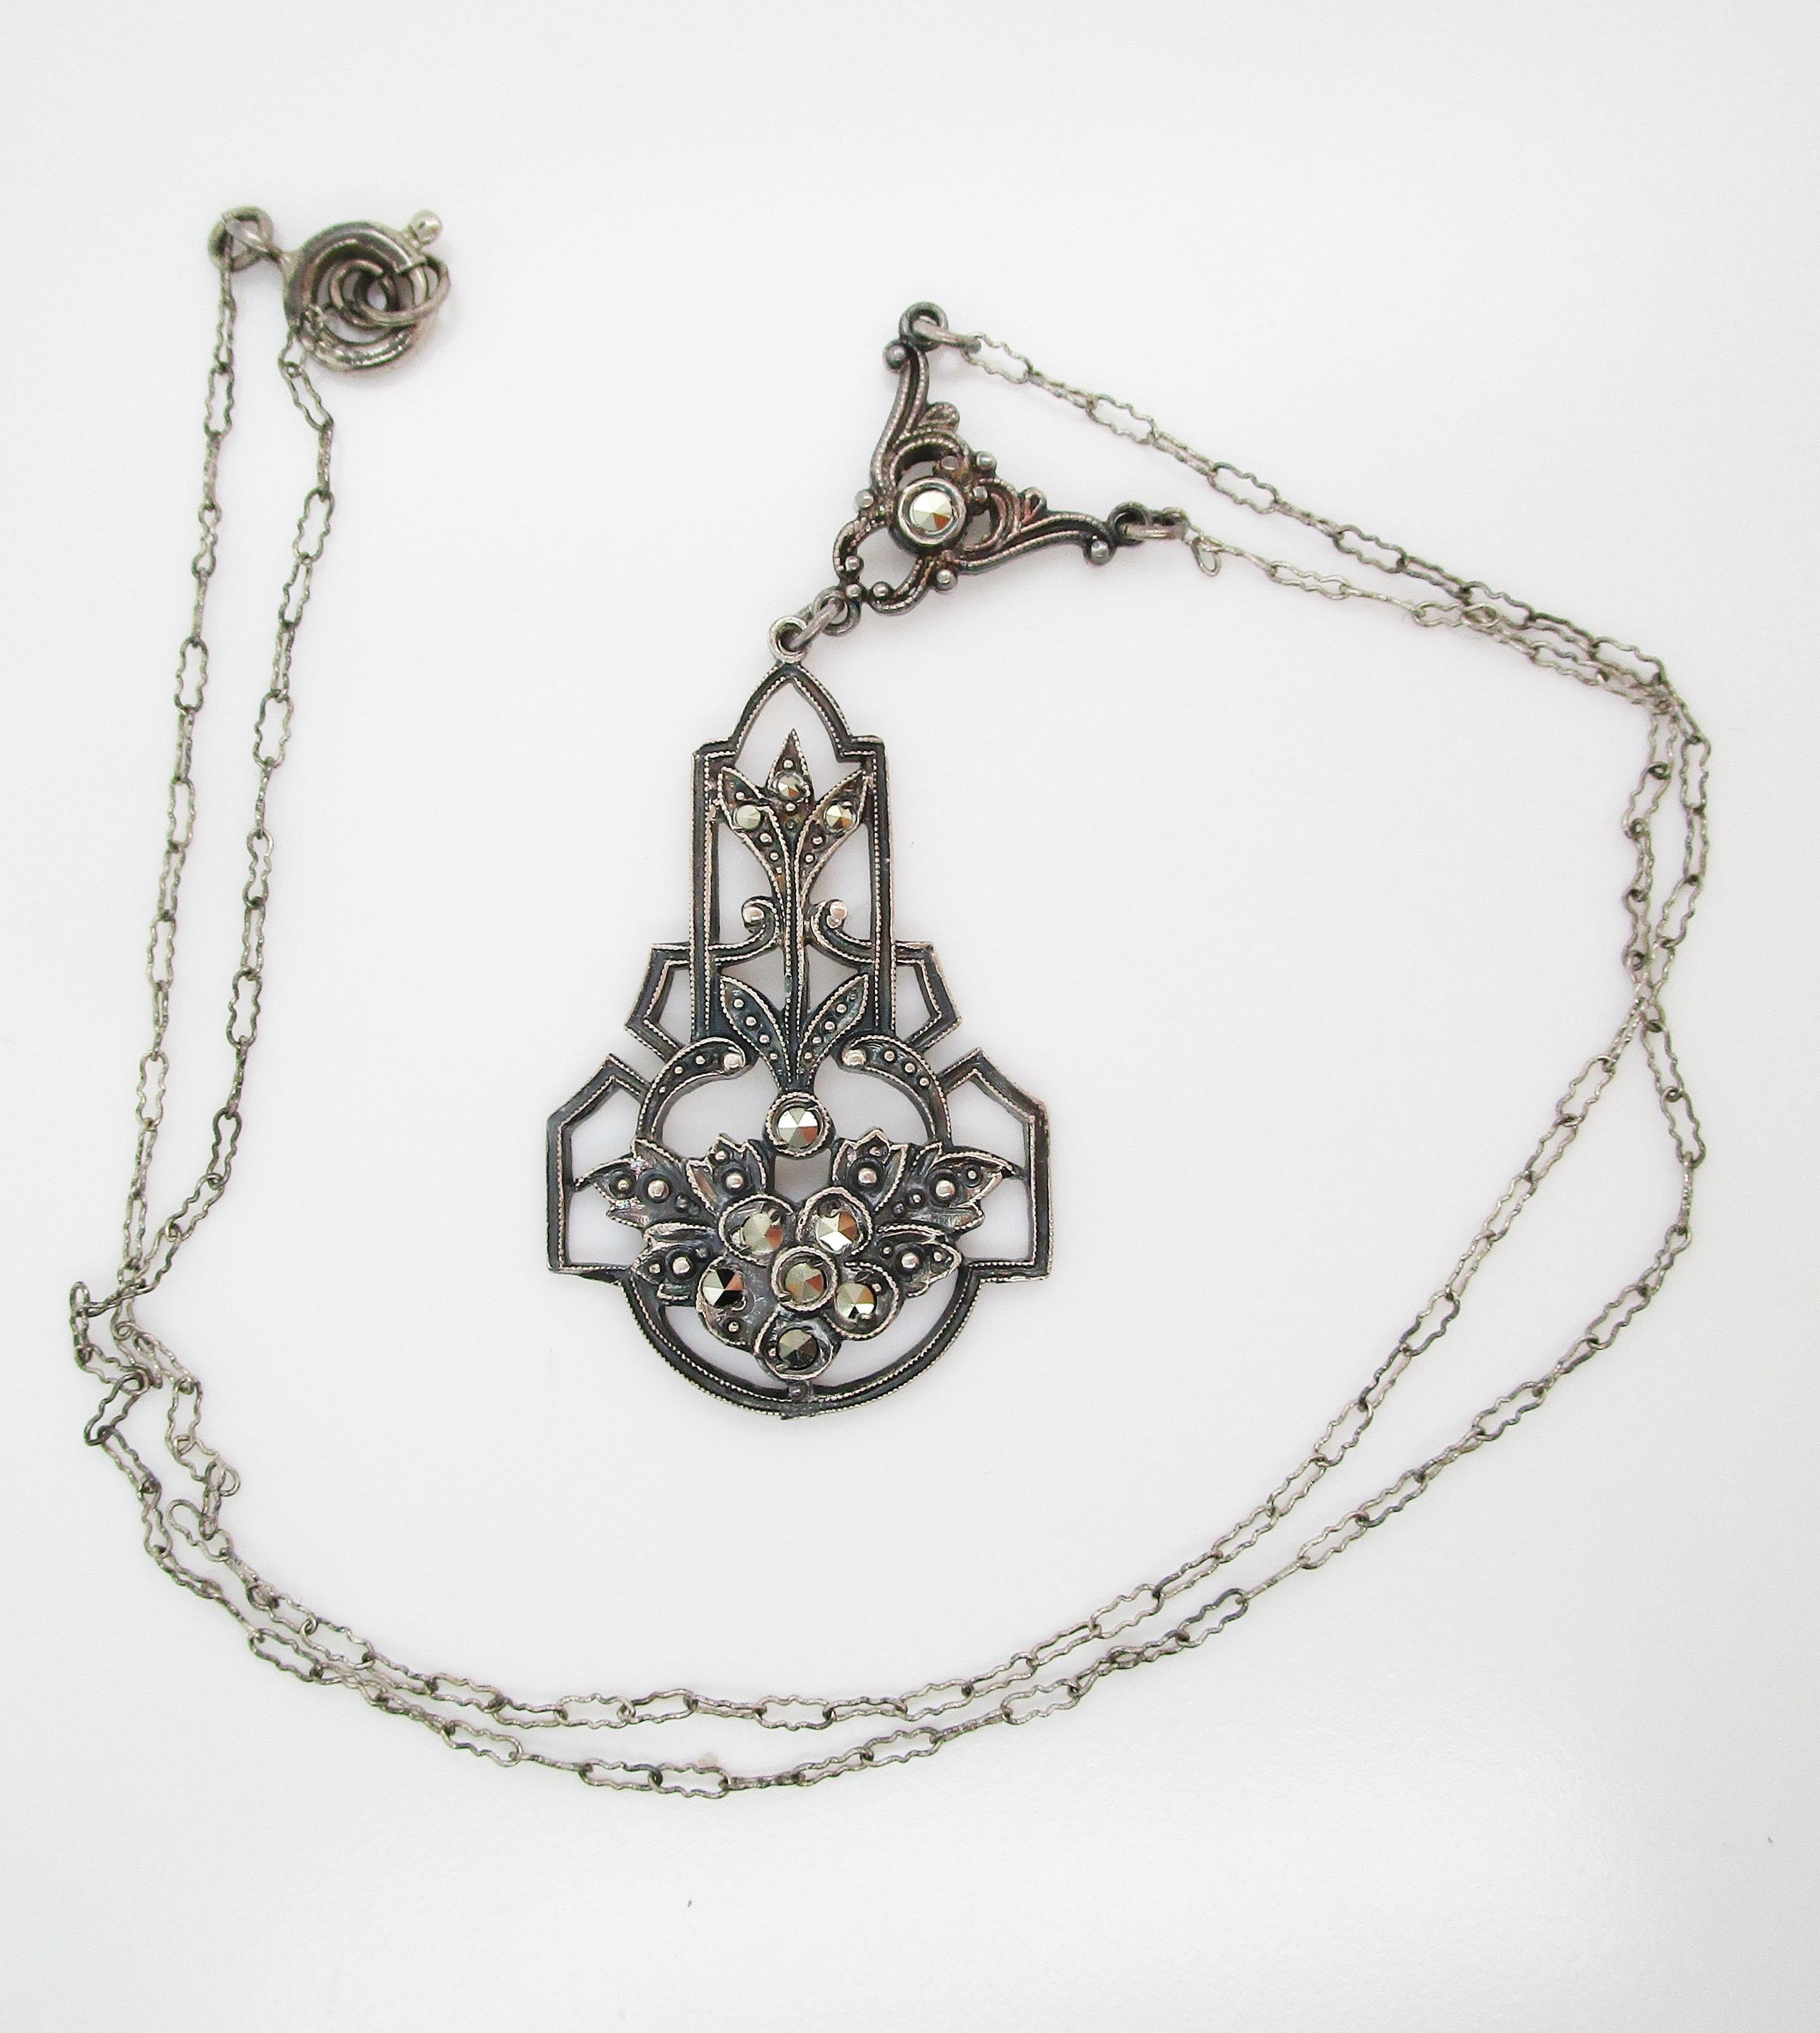 This delicate Art Deco necklace is from 1915 and simply oozes antique charm-with its warm sterling silver and flashing marcasite stones, it is truly remarkable! The dramatic, articulated center of the necklace features a cutout floral design